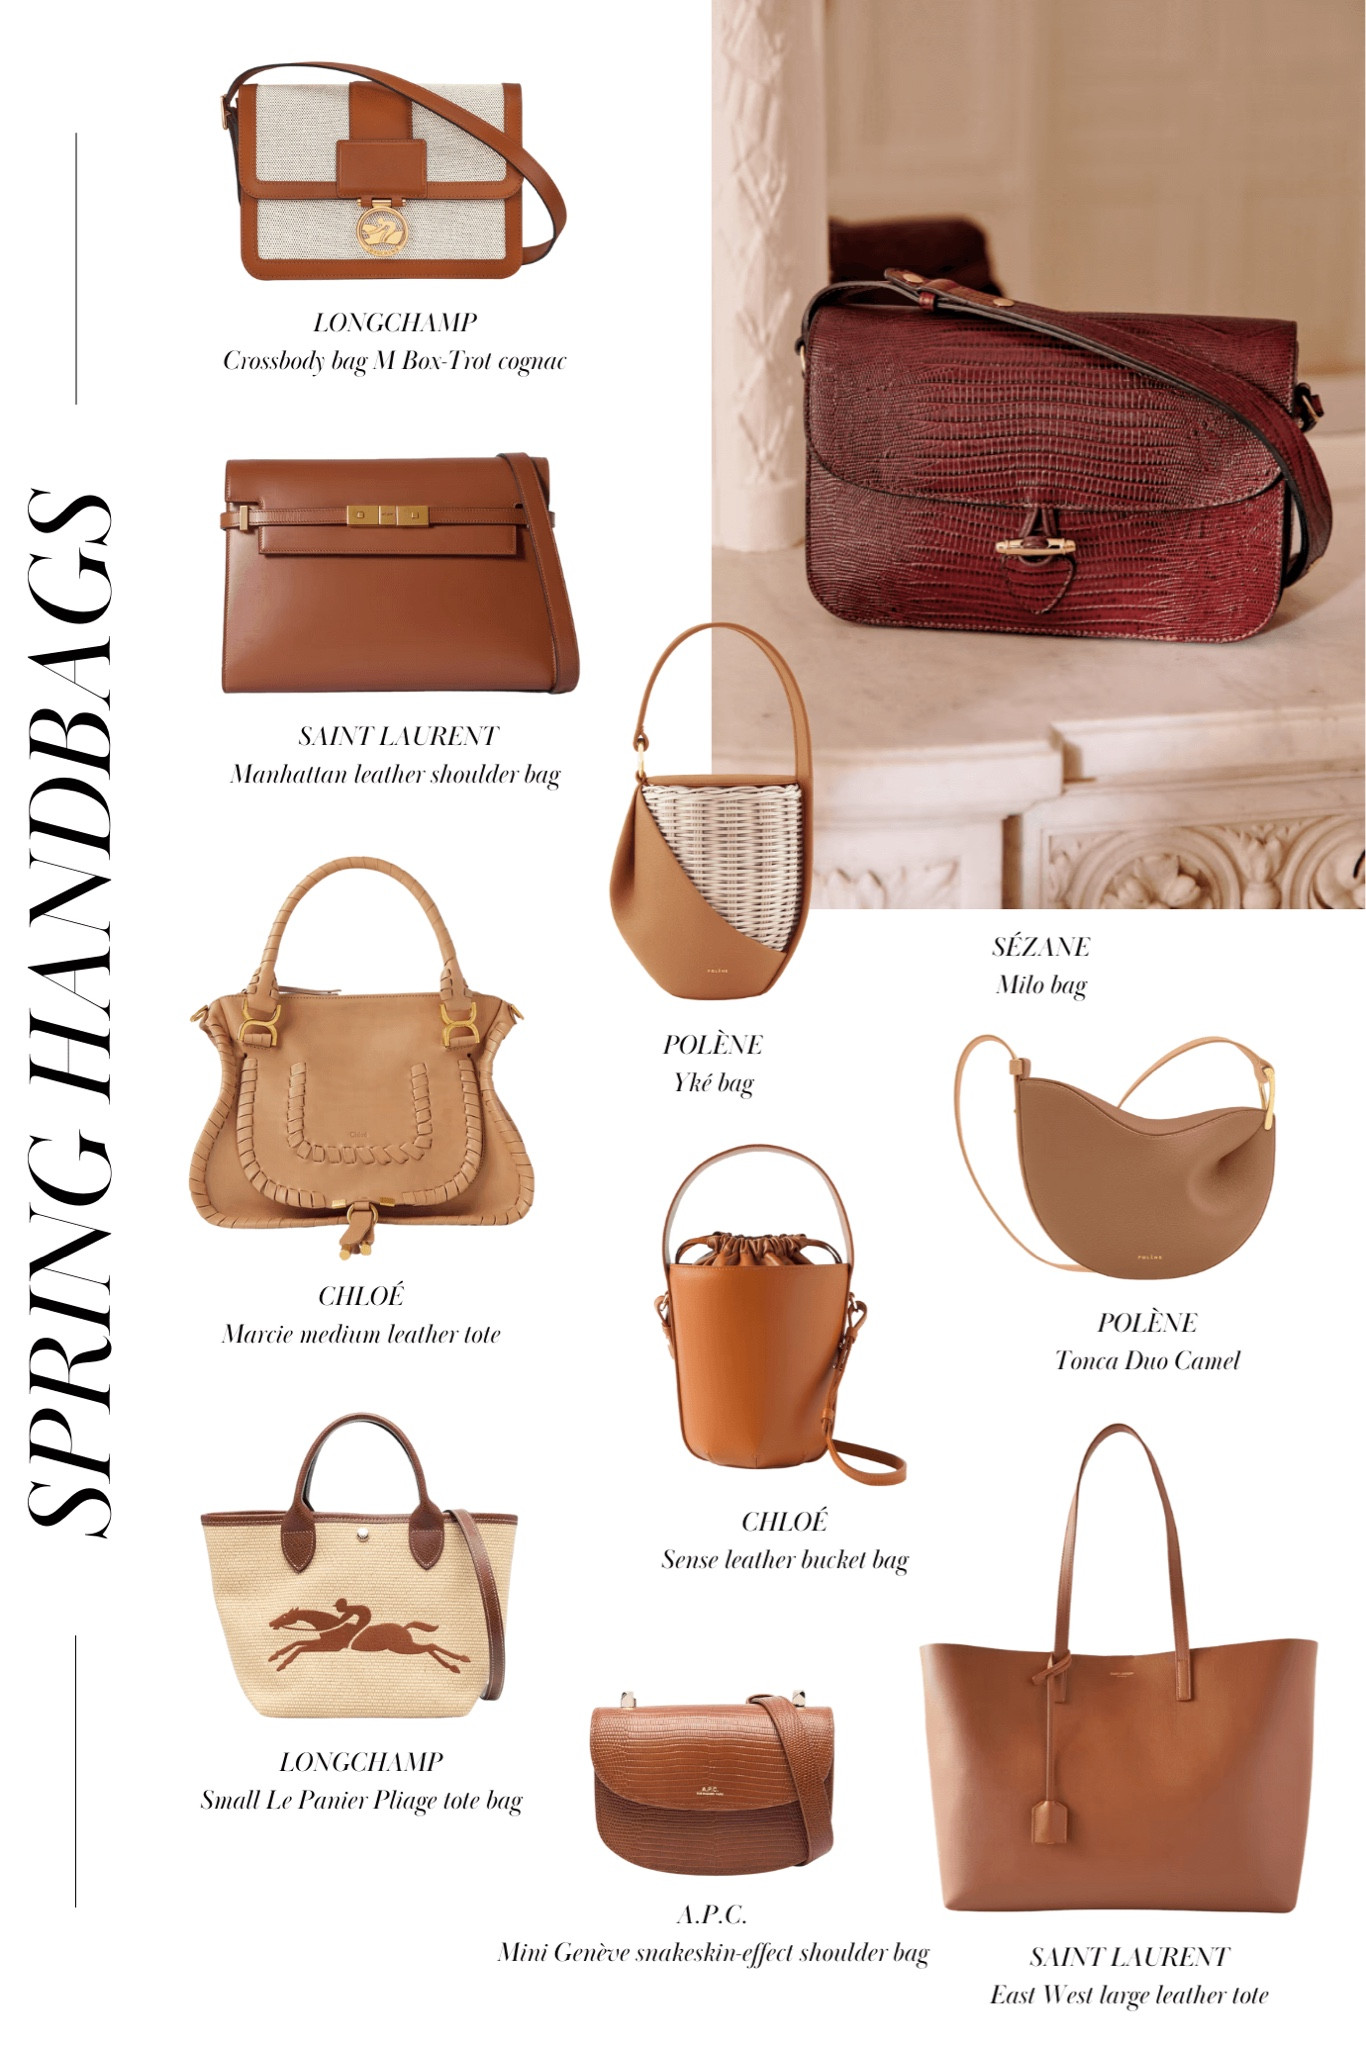 Hot to trot: Bags to carry now and love forever